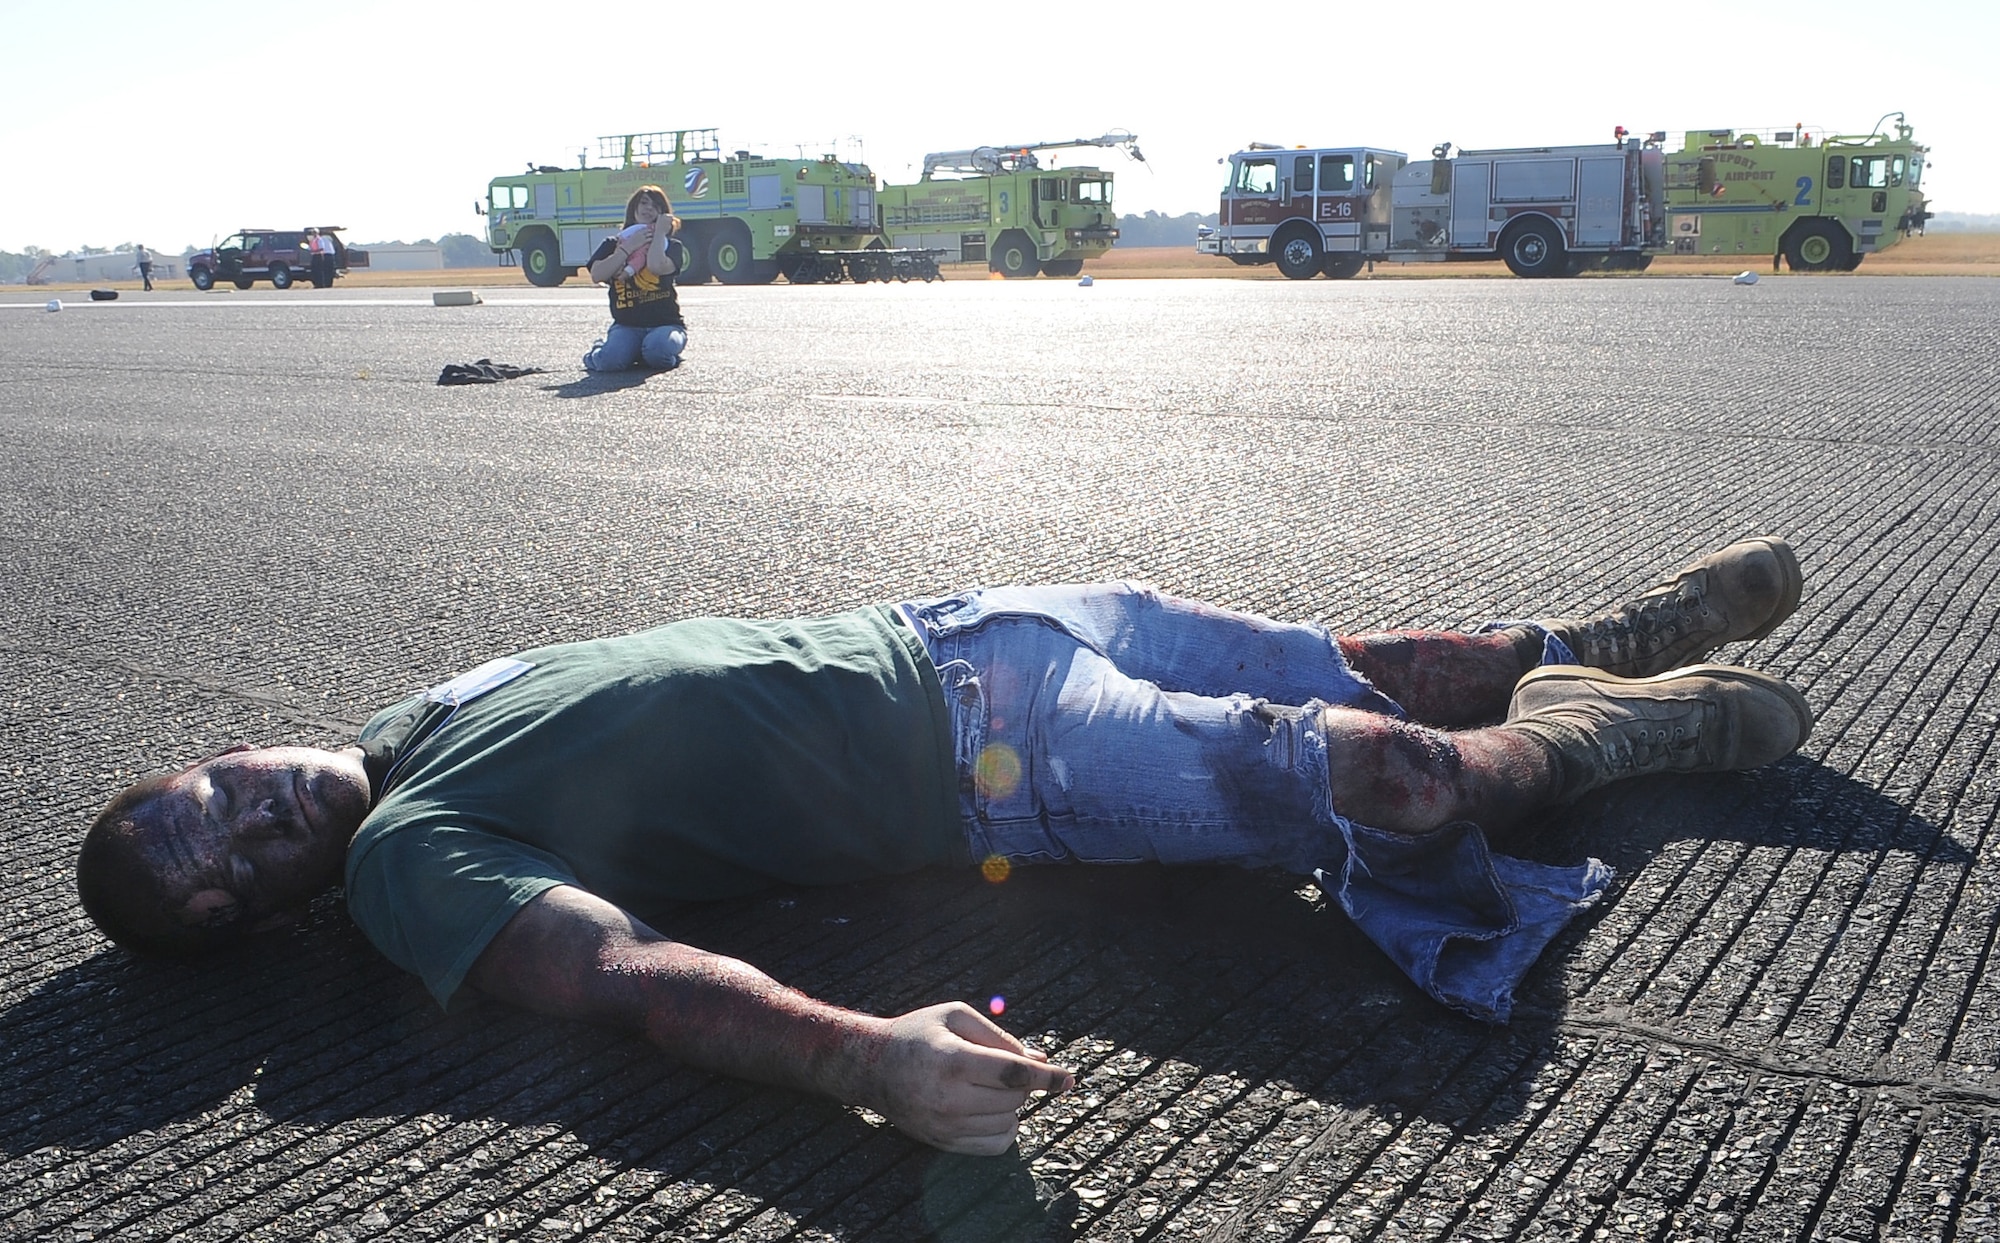 BARKSDALE AIR FORCE BASE, La. -- A victim from a simulated plane crash lies severely wounded amongst other victims during a full-scale disaster drill at the Shreveport Regional airport Oct. 6. More than 60 simulated victims were either listed as deceased or injured and Bossier City, Shreveport and Caddo law enforcement, fire department and emergency medical technicians arrived on scene to assist. The exercise provided training and an opportunity for Barksdale Airmen to work with other emergency units.  (U.S. Air Force photo/Senior Airman Amber Ashcraft) (RELEASED)